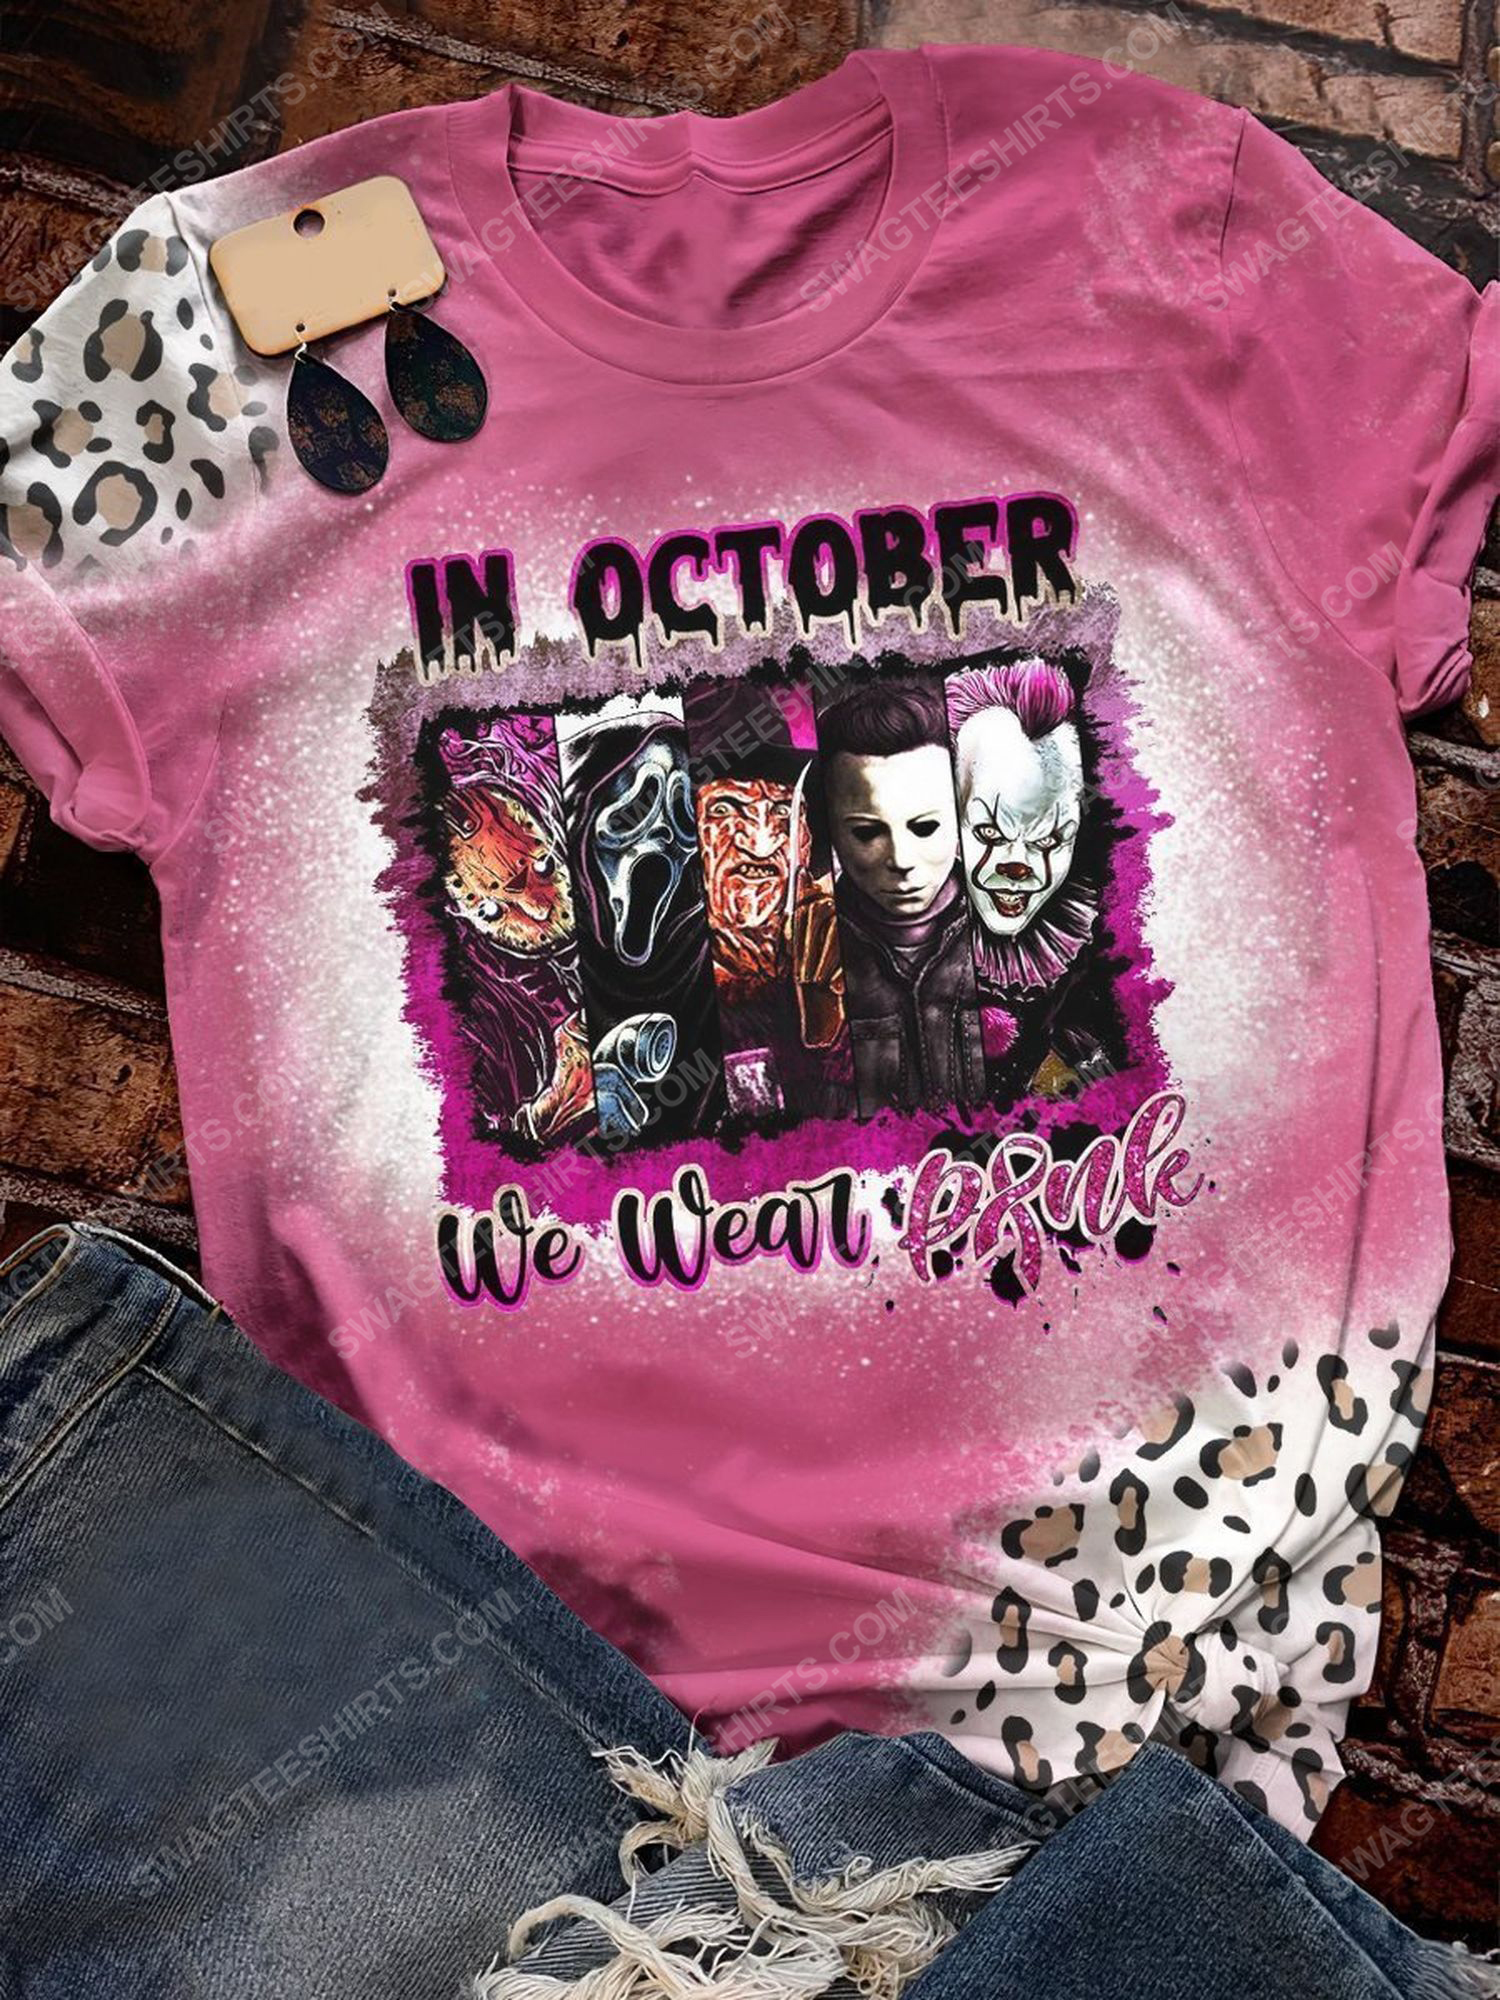 [special edition] Breast cancer awareness in october we wear pink serial killers shirt – maria (cancer)